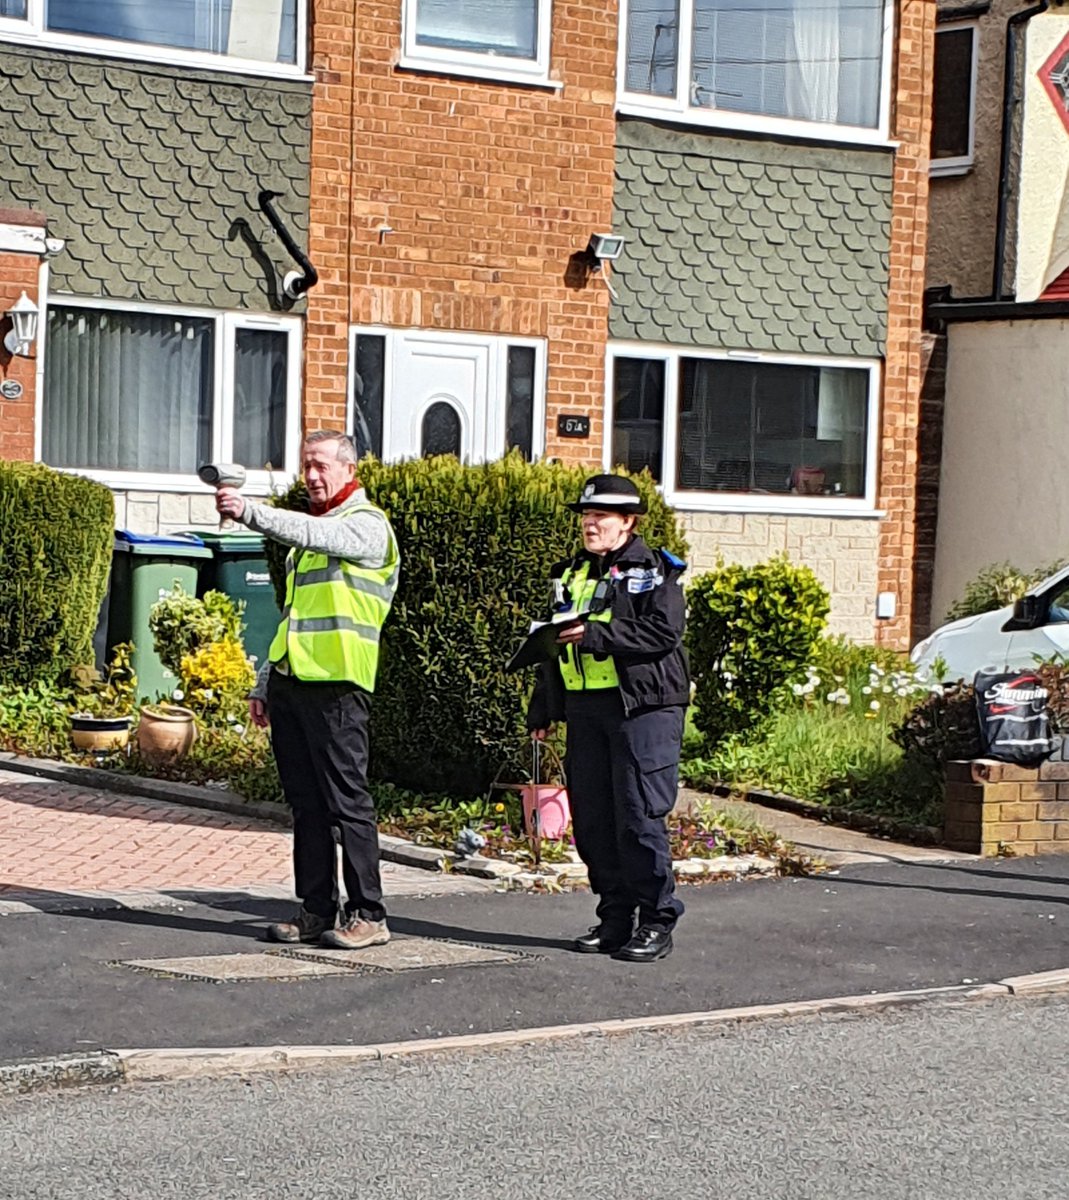 Oldbury Pcso's working with streetwatch volunteers on a Speed Watch Operation on Old Warley.#dayofaction